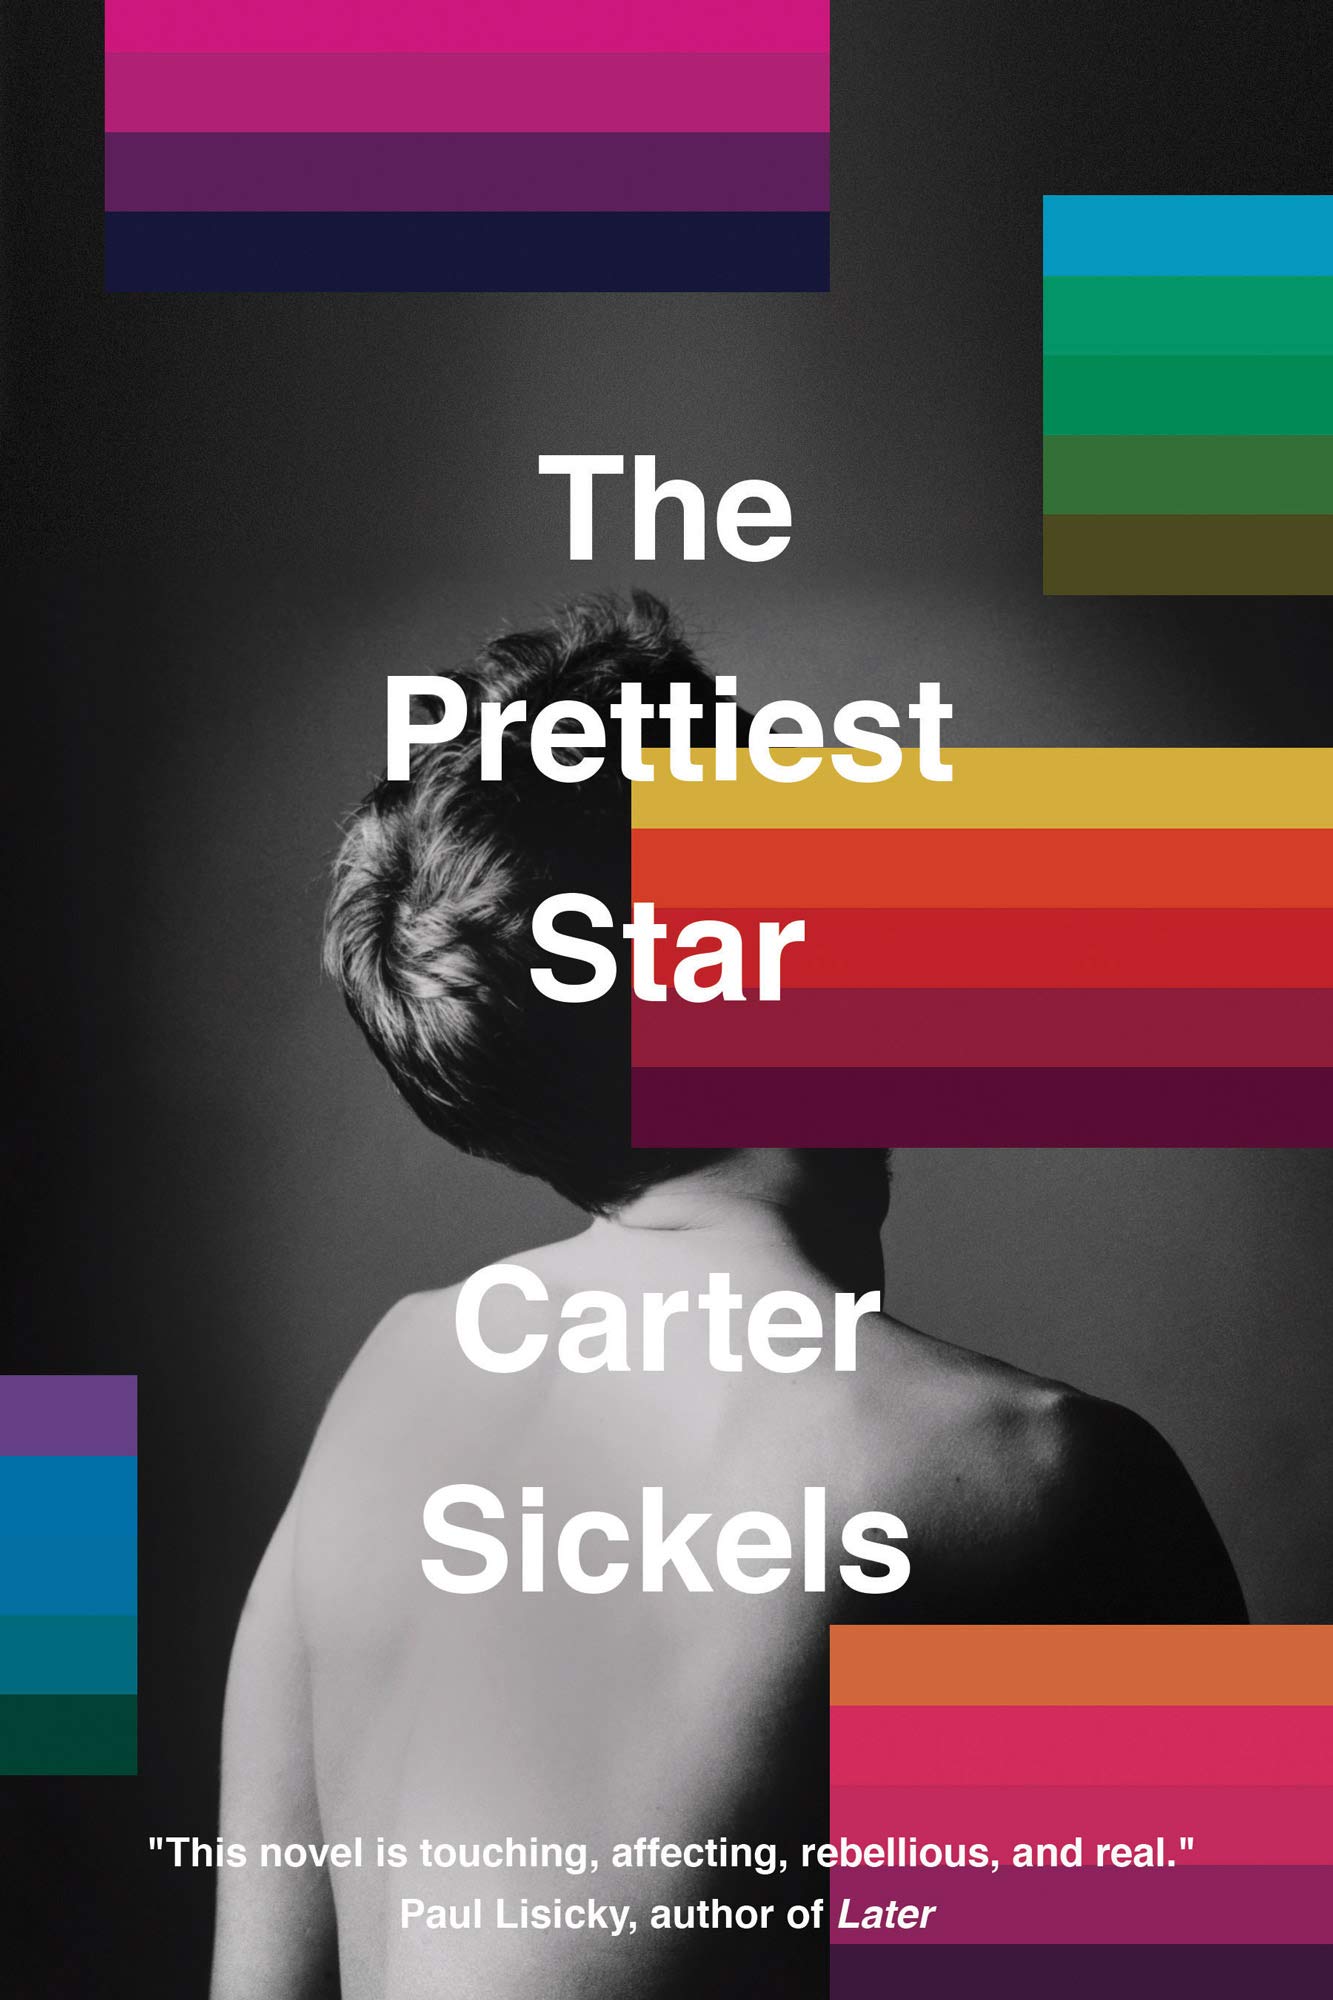 “The Prettiest Star” by Carter Sickels, and other queer stories